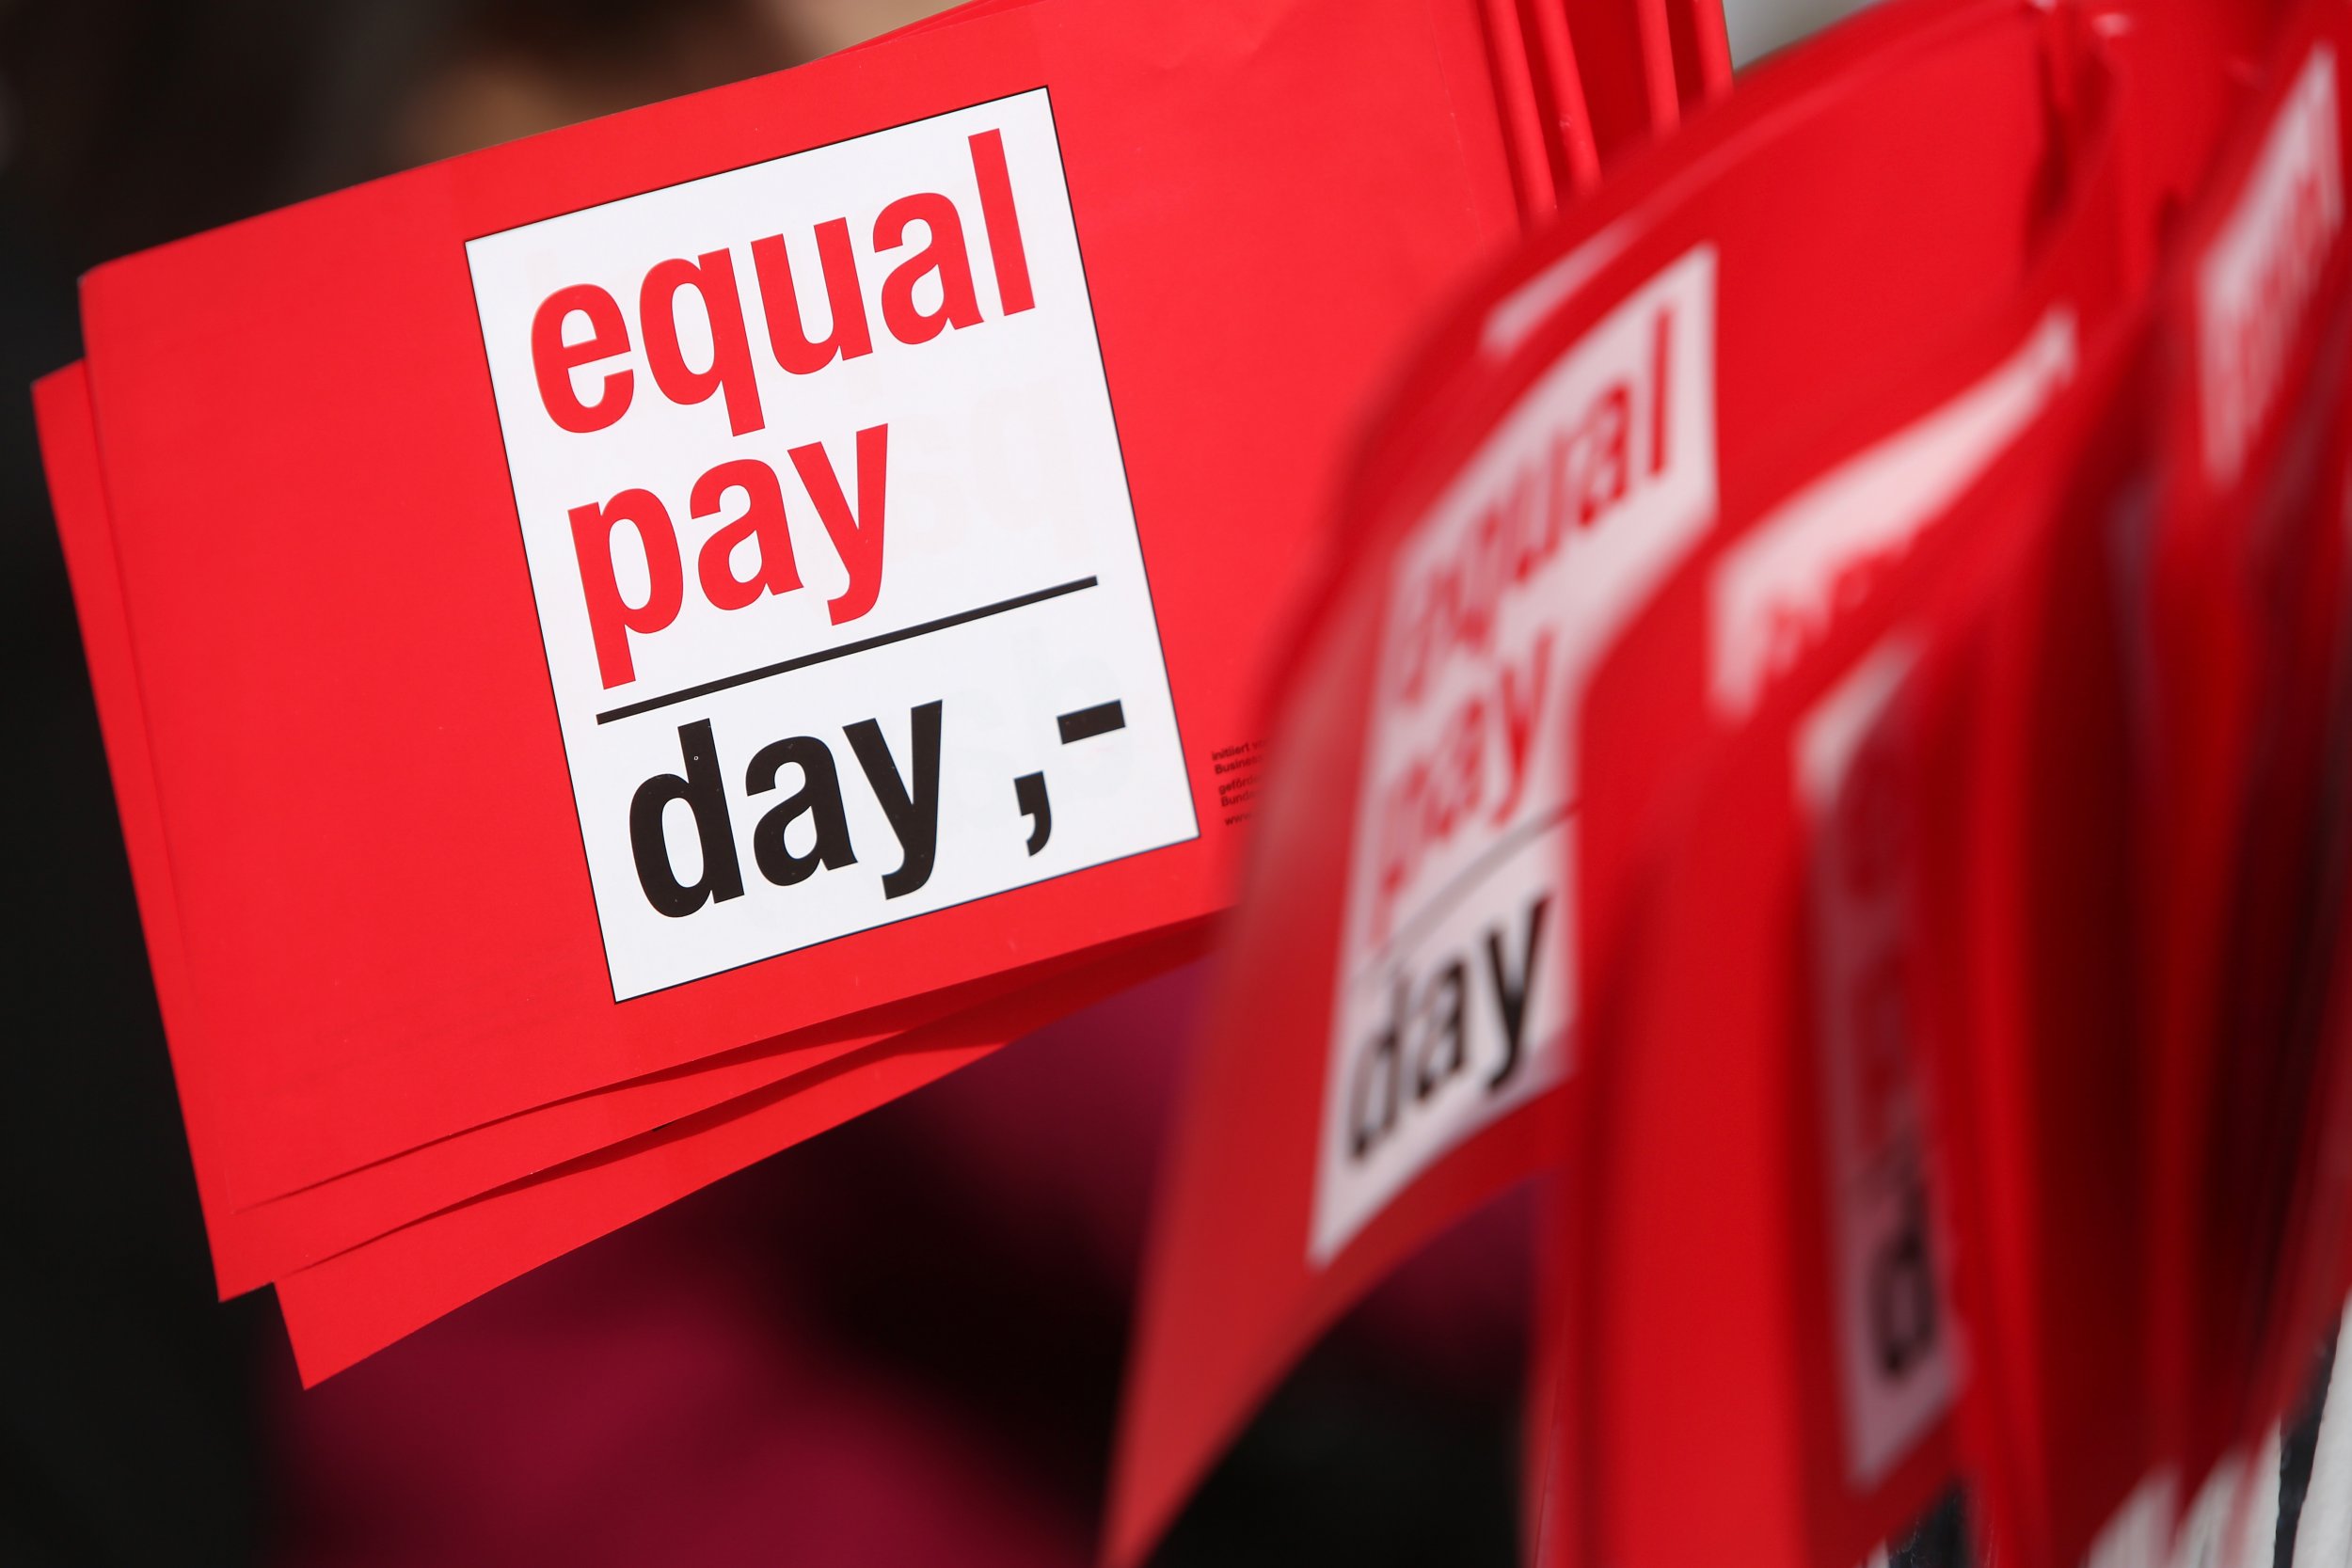 Conservative Women S Org Equal Pay Day Is Misleading Effort To Make Women Feel Slighted At Work